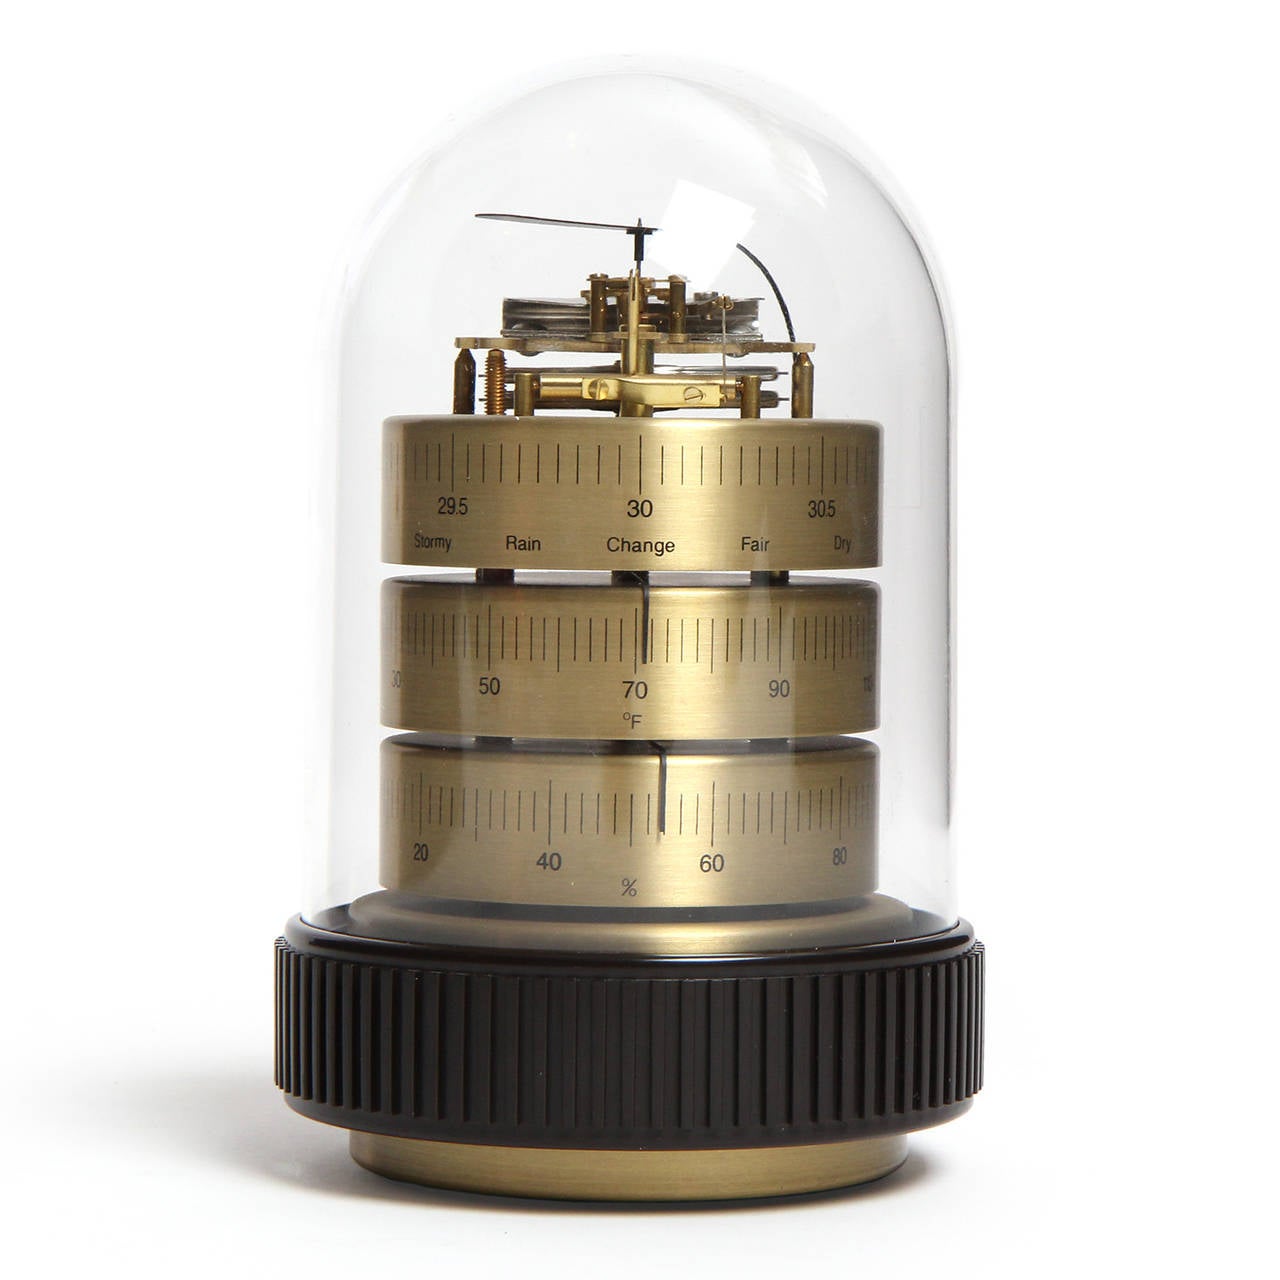 A beautiful, precision-machined desk top weather station encapsulated in a clear dome and incorporating three specific devices: a barometer, thermometer and hygrometer.